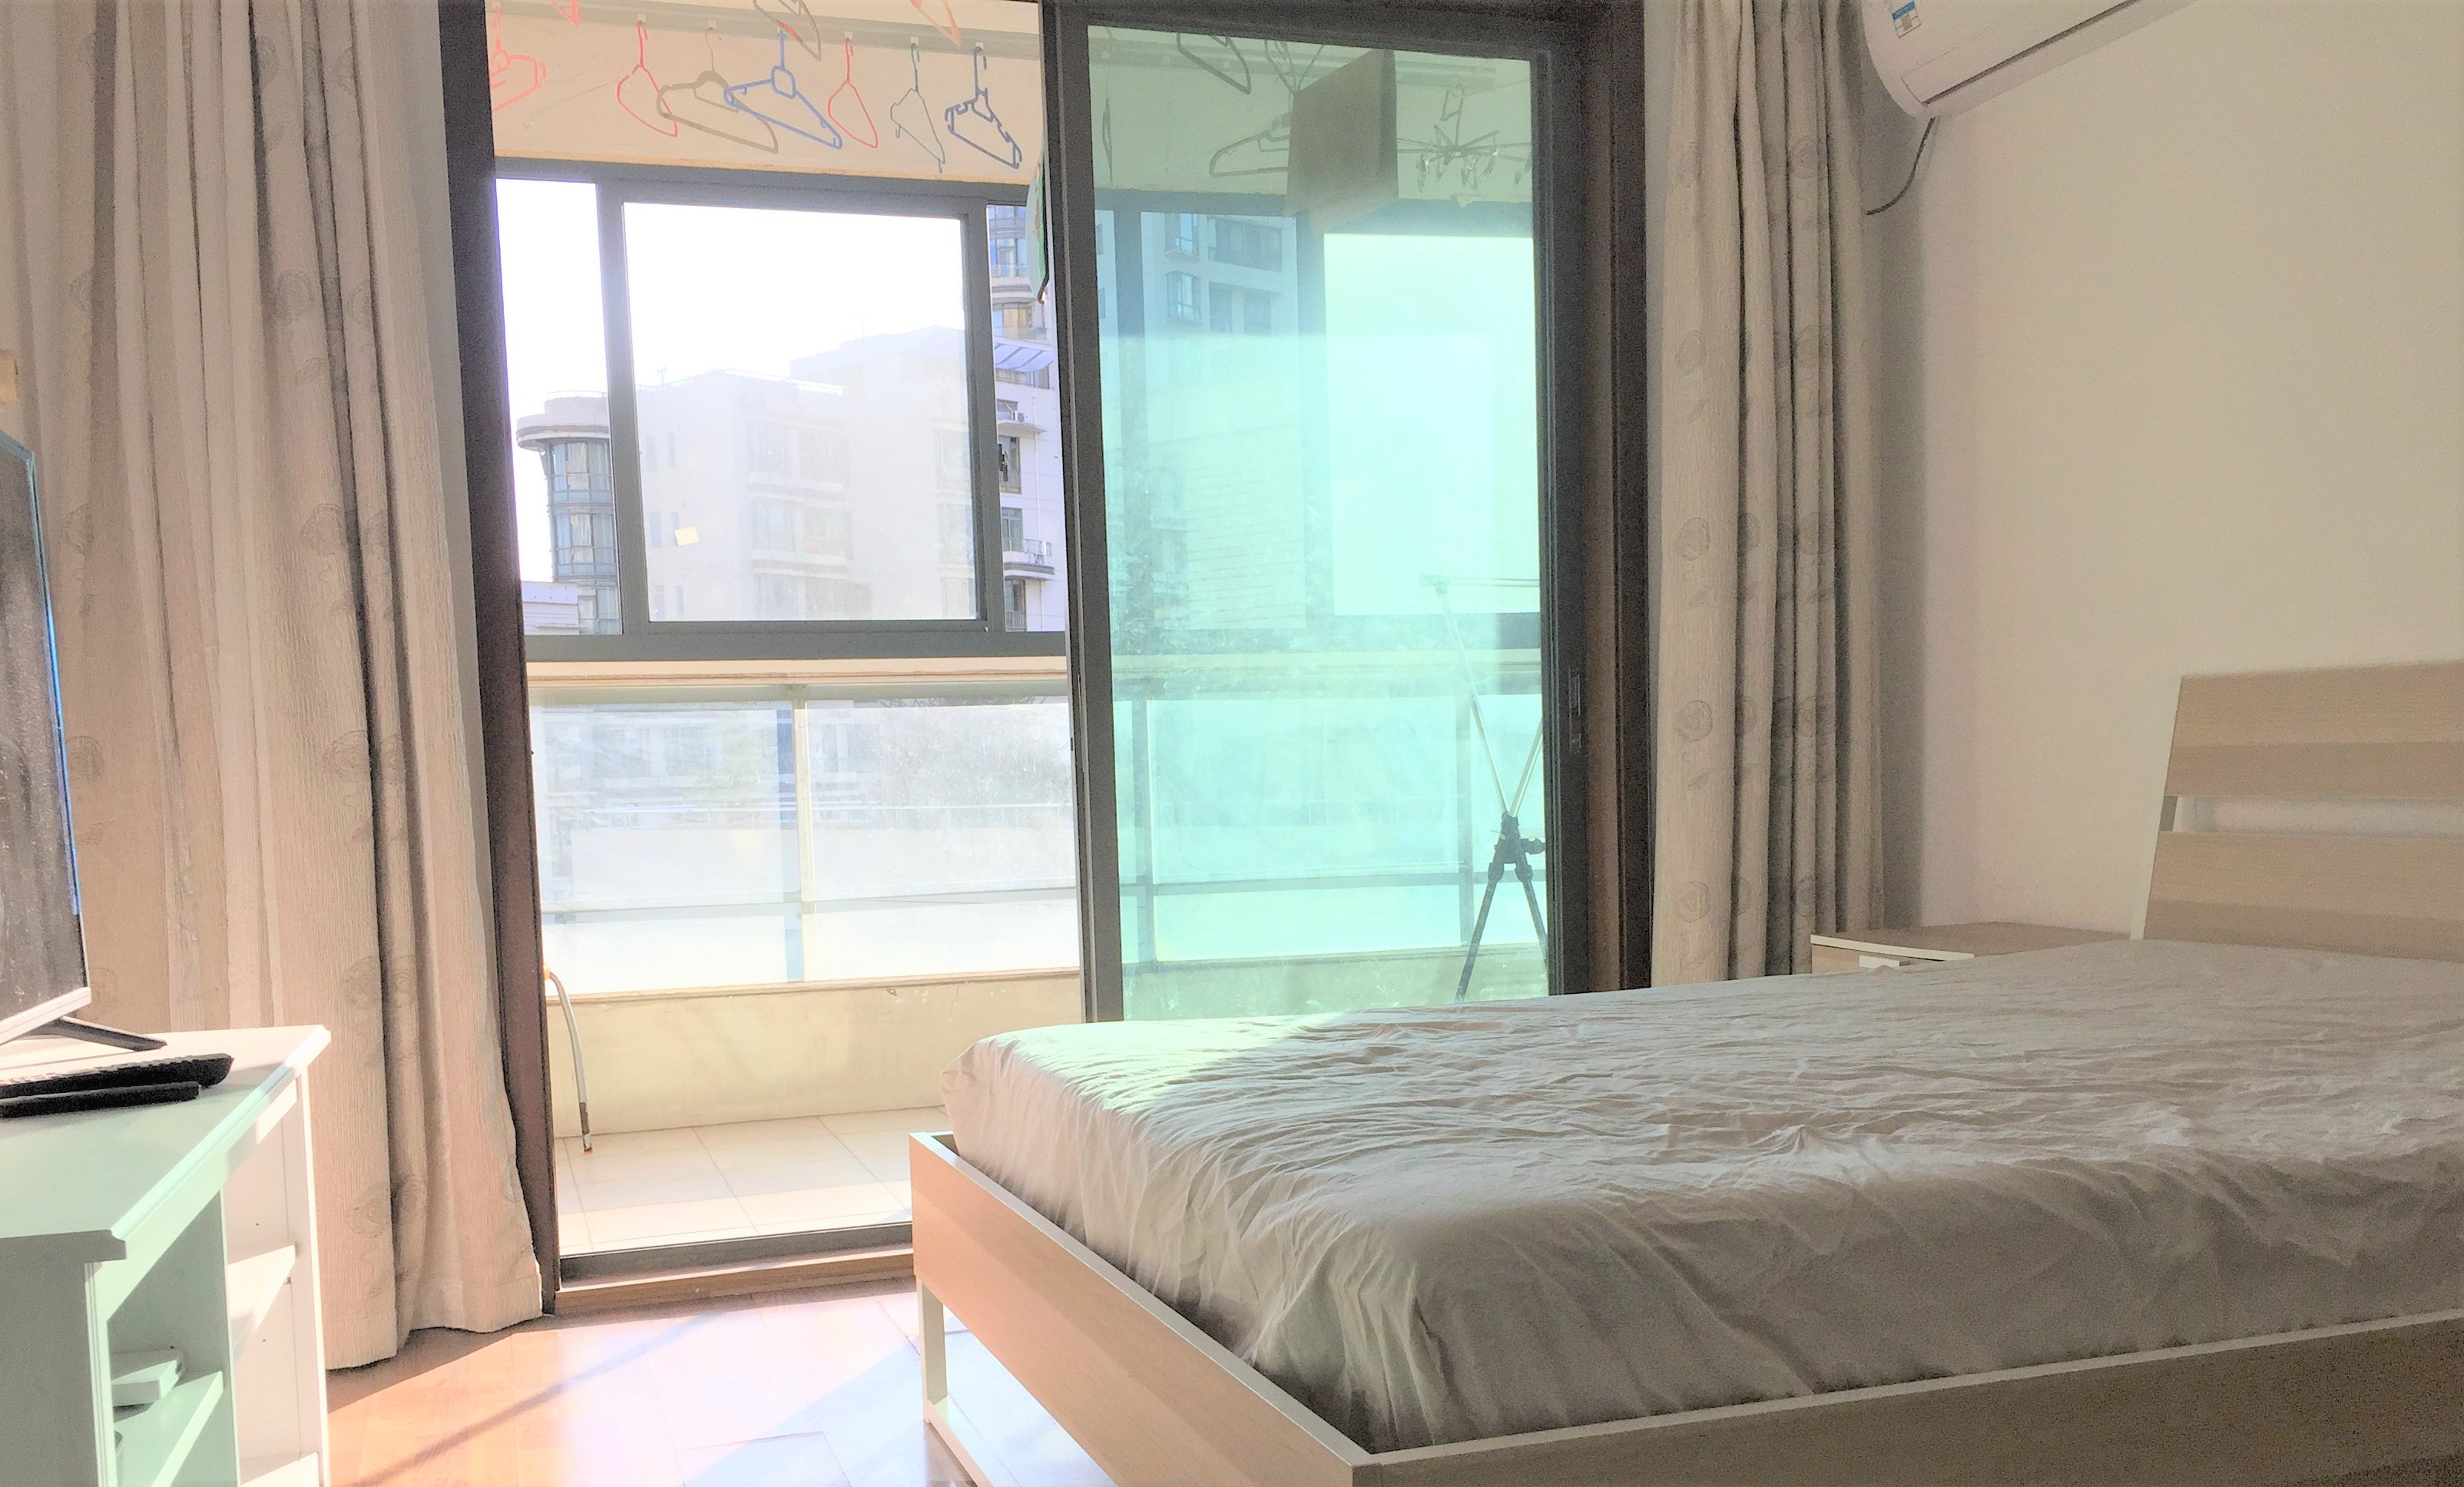 balcony entrance Great Value 2BR Top of City Apt for Rent in Shanghai Jing’an Near LN 2/12/13